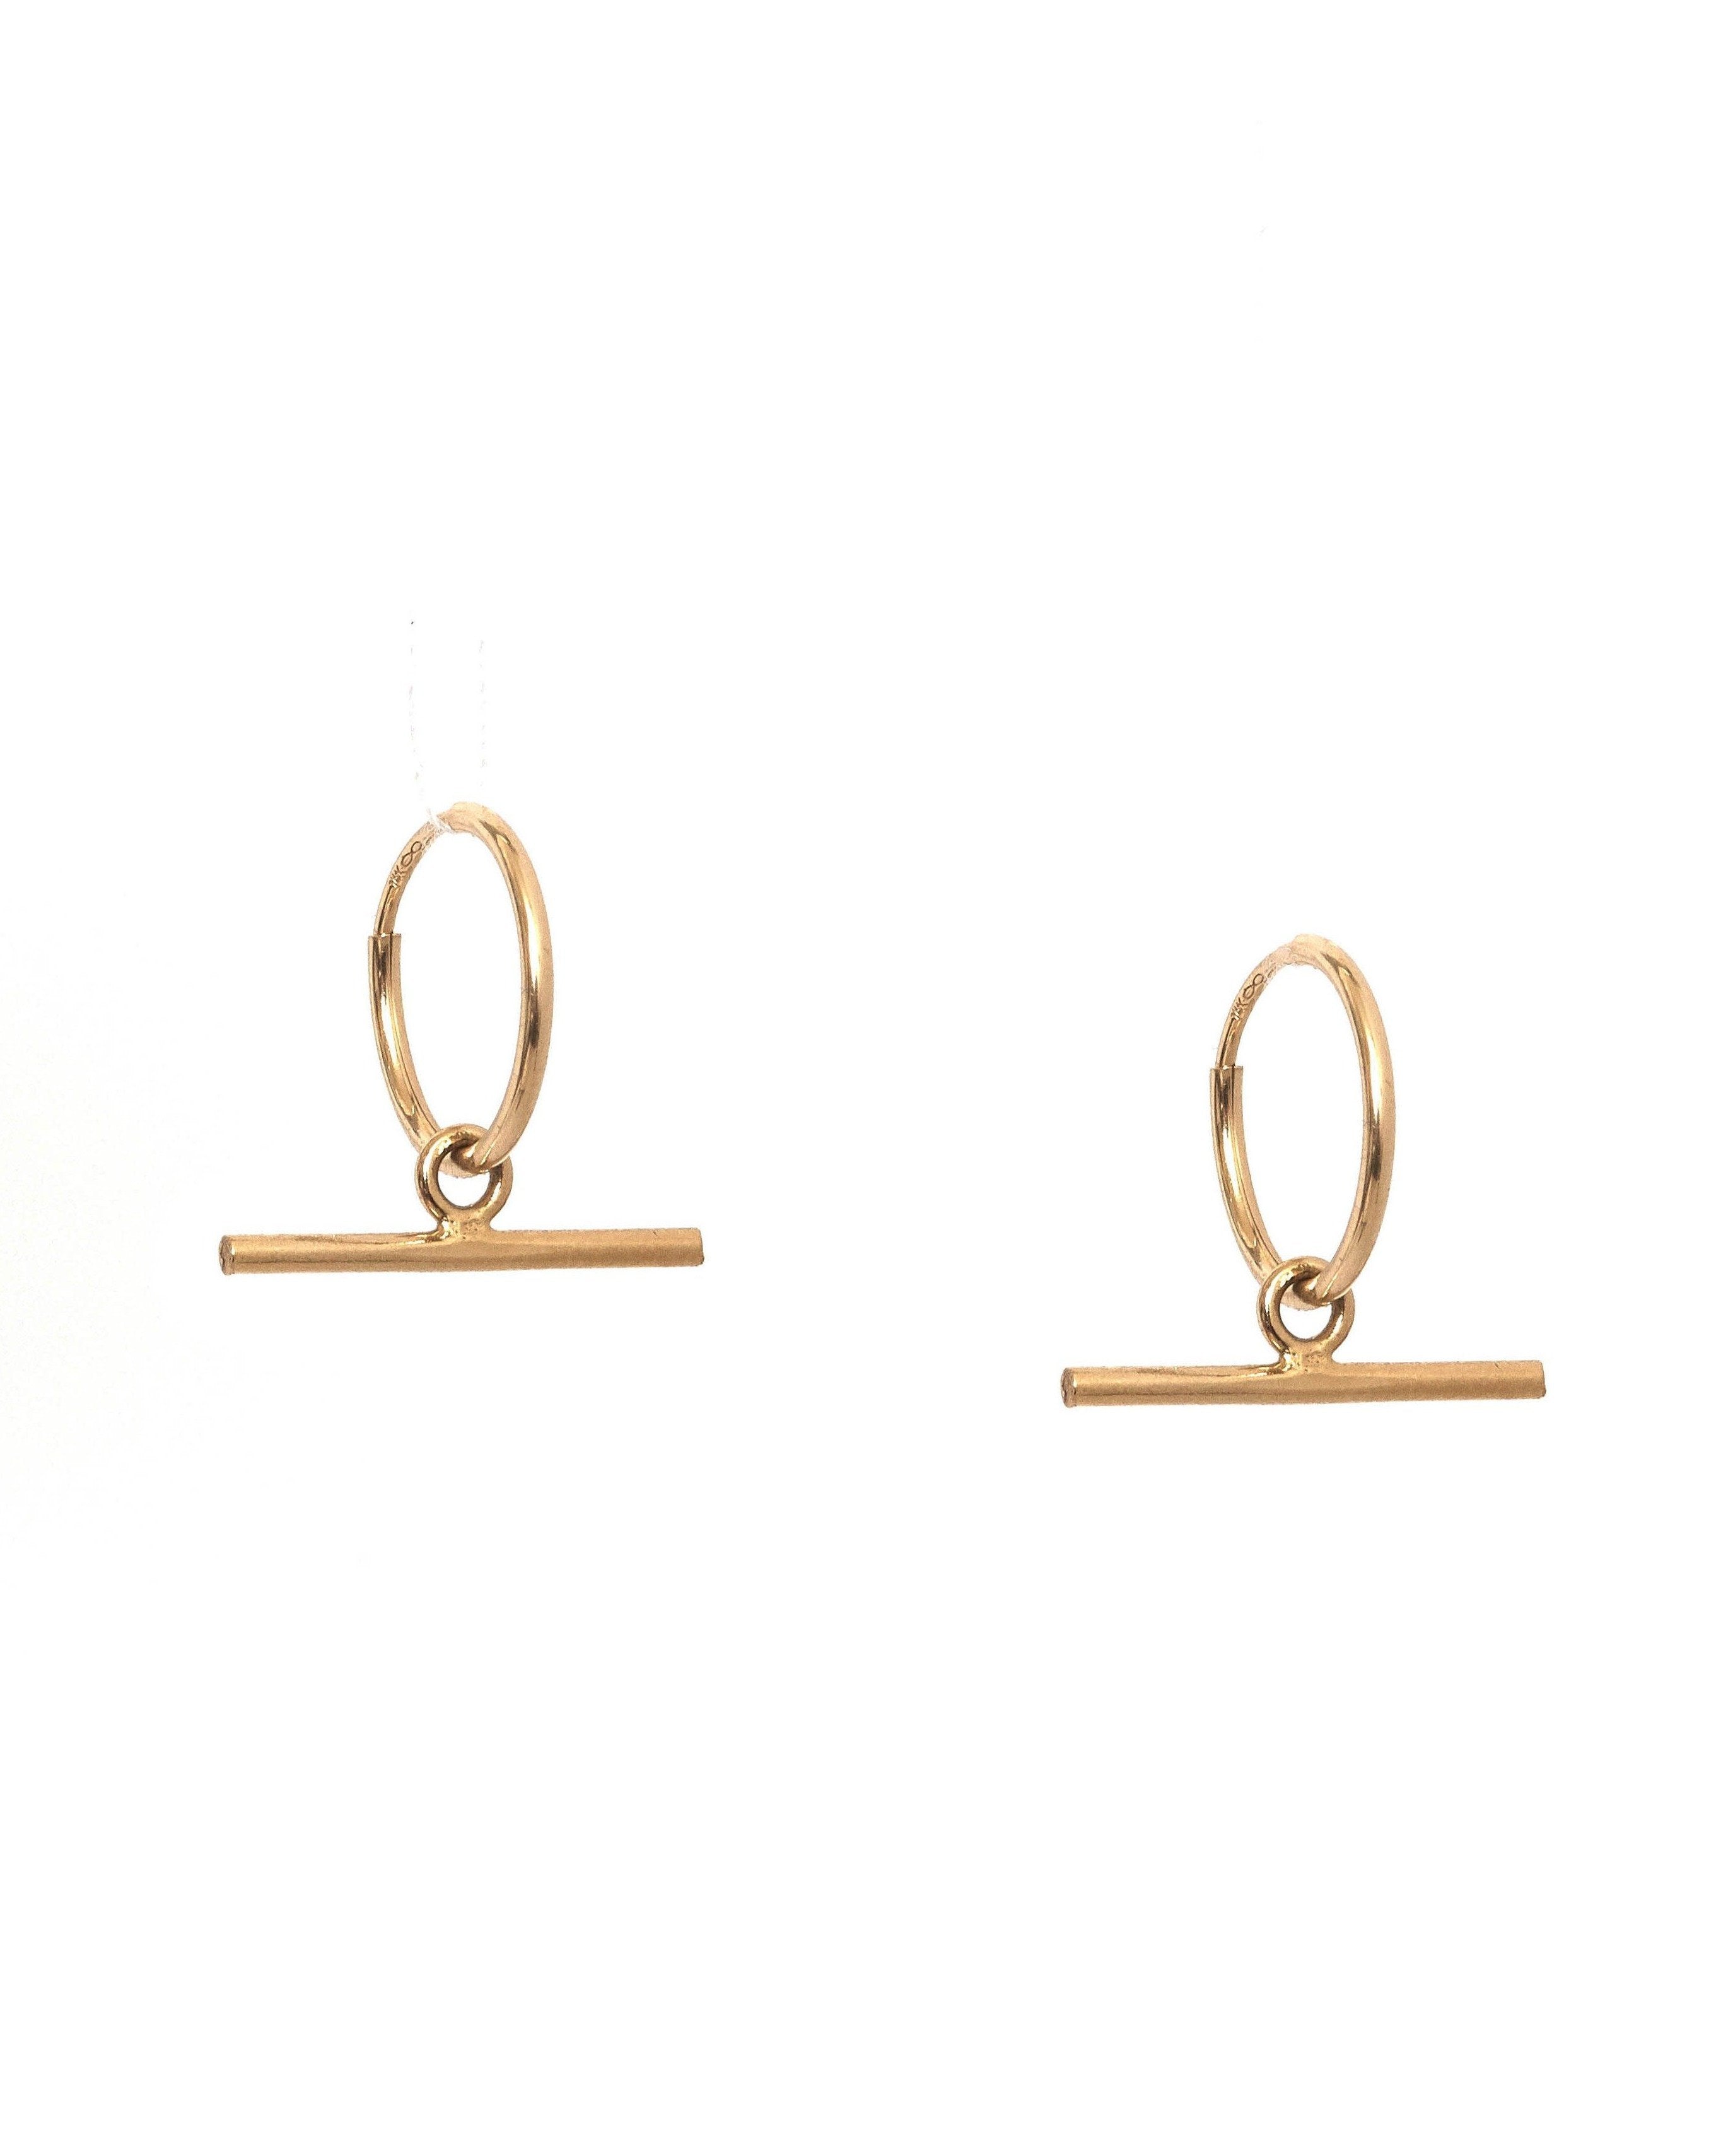 Arkis Earrings Earrings by KOZAKH. 12mm hoop earrings, crafted in 14K Gold Filled,  with seamless closure and with hanging horizontal bar stick.